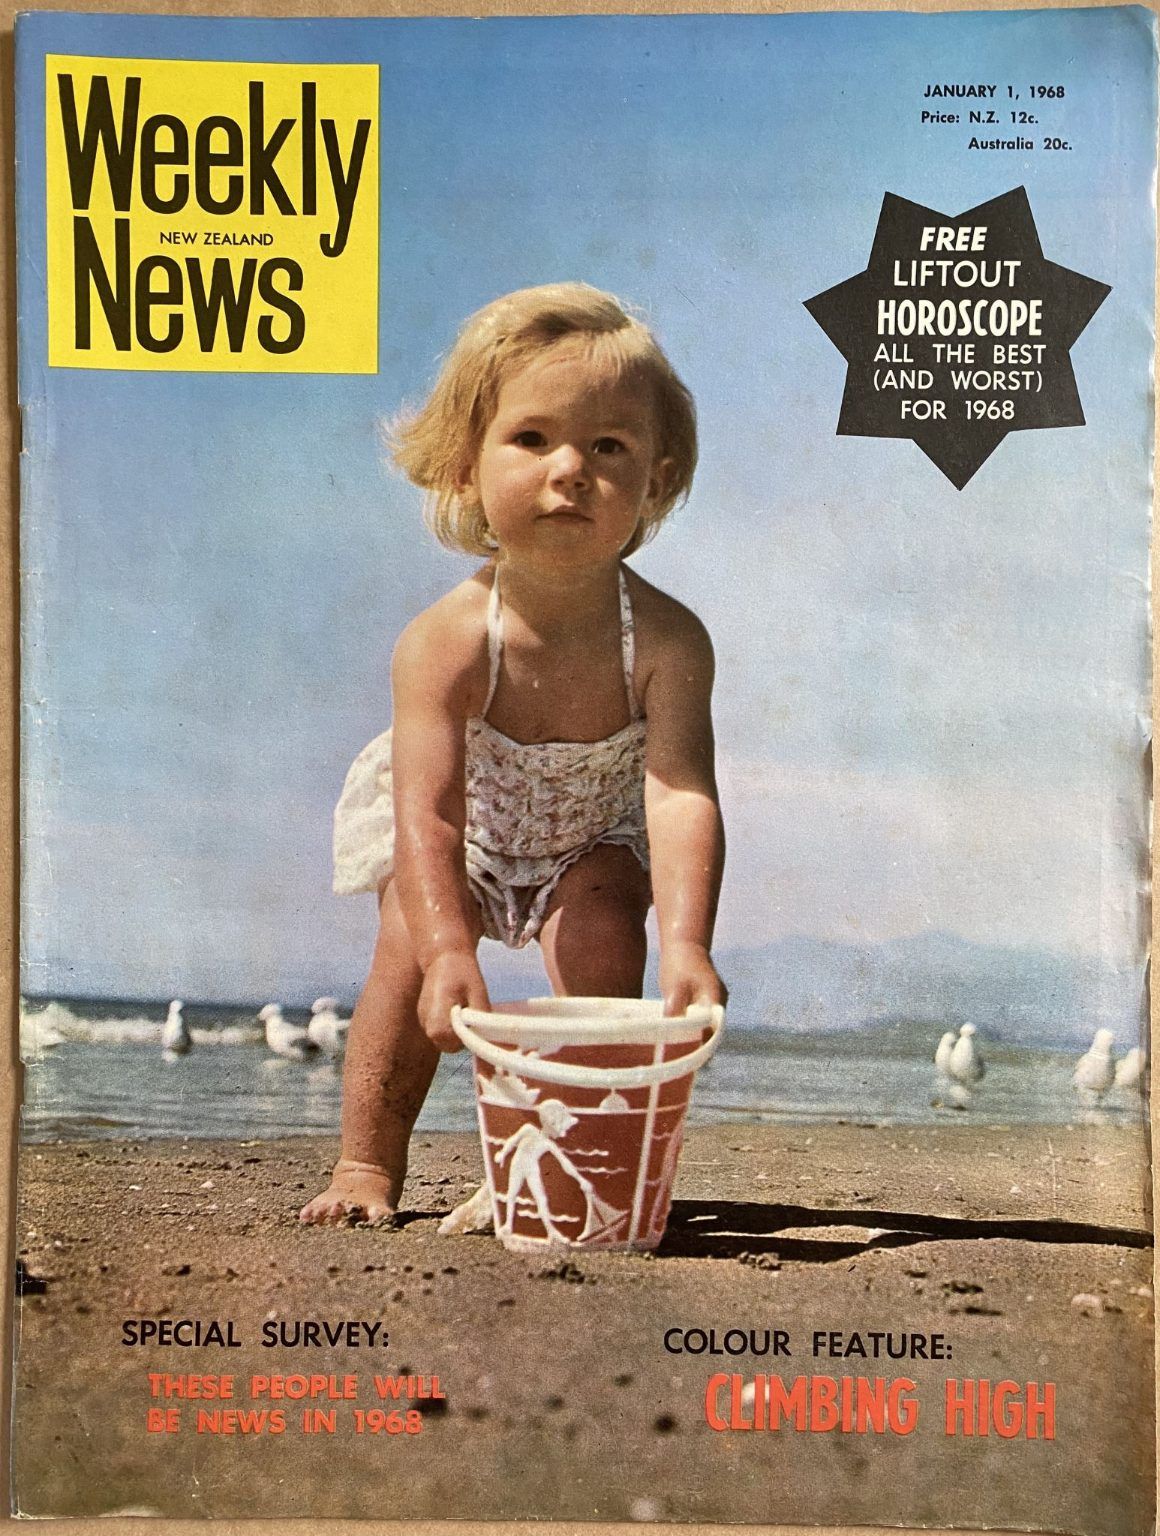 OLD NEWSPAPER: New Zealand Weekly News, No. 5431, 1 January 1968